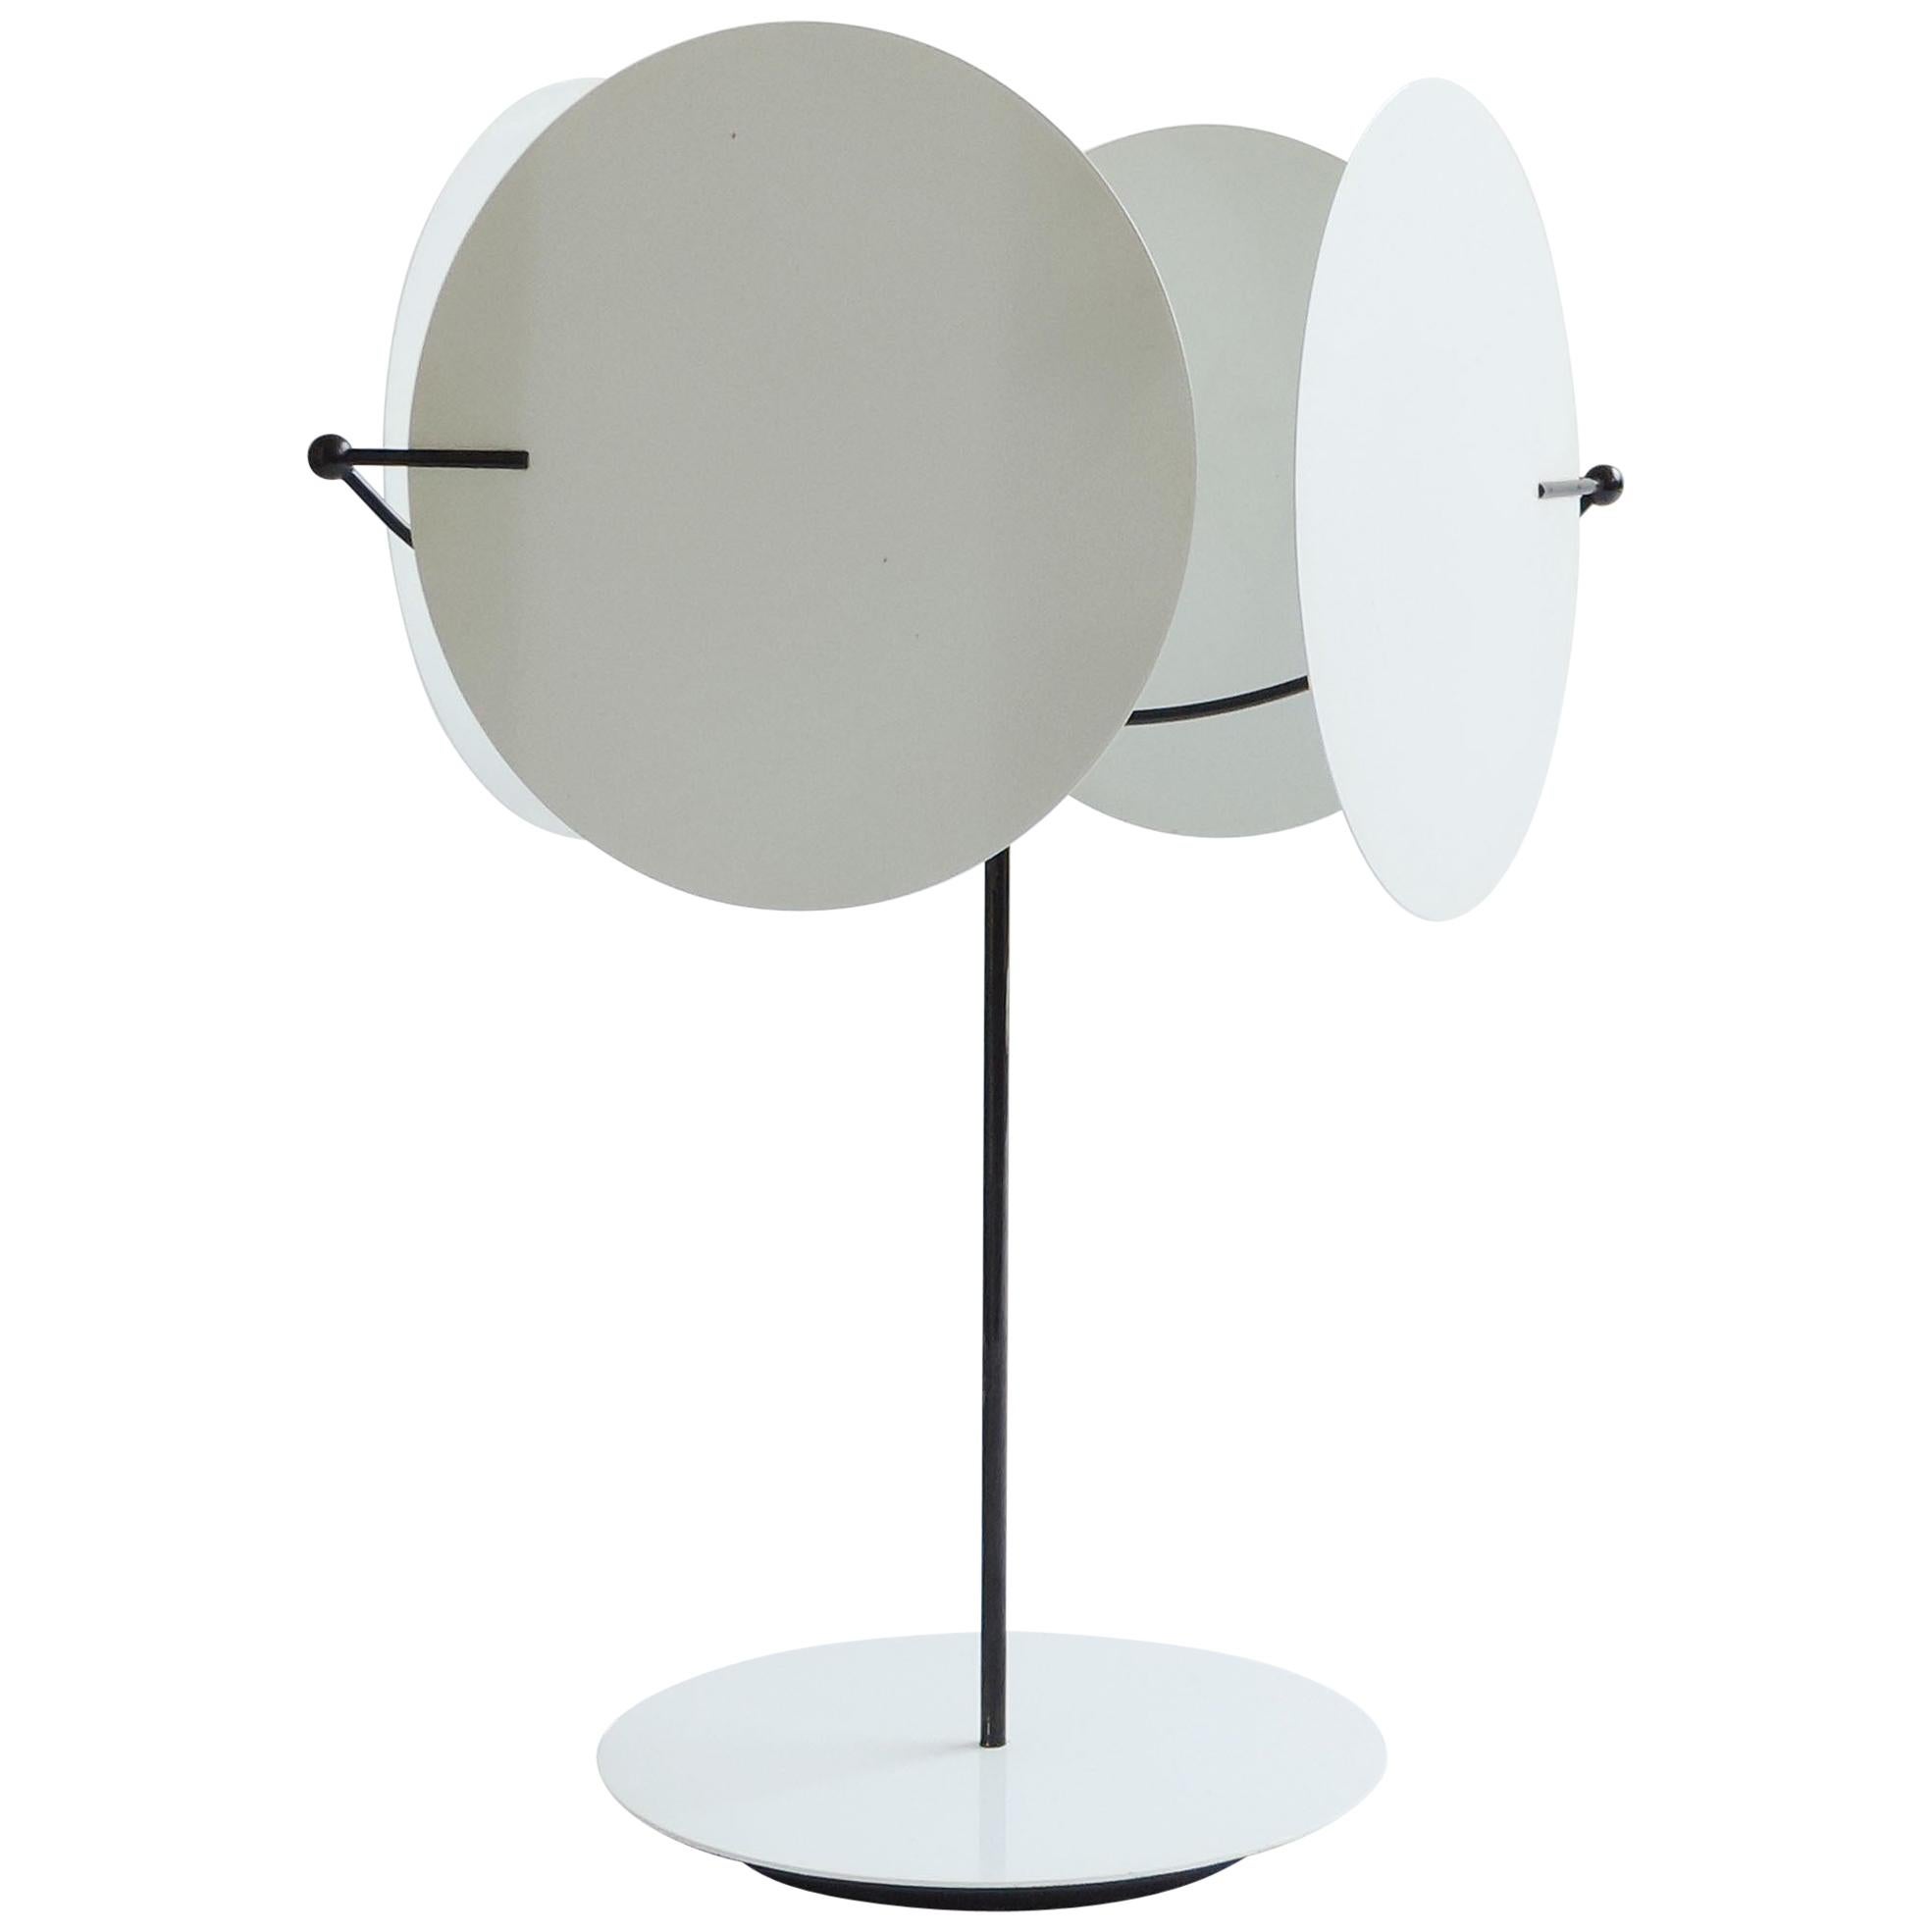 Vico Magistretti 'Monet' Table Lamp for Oluce, Italy, 1980s